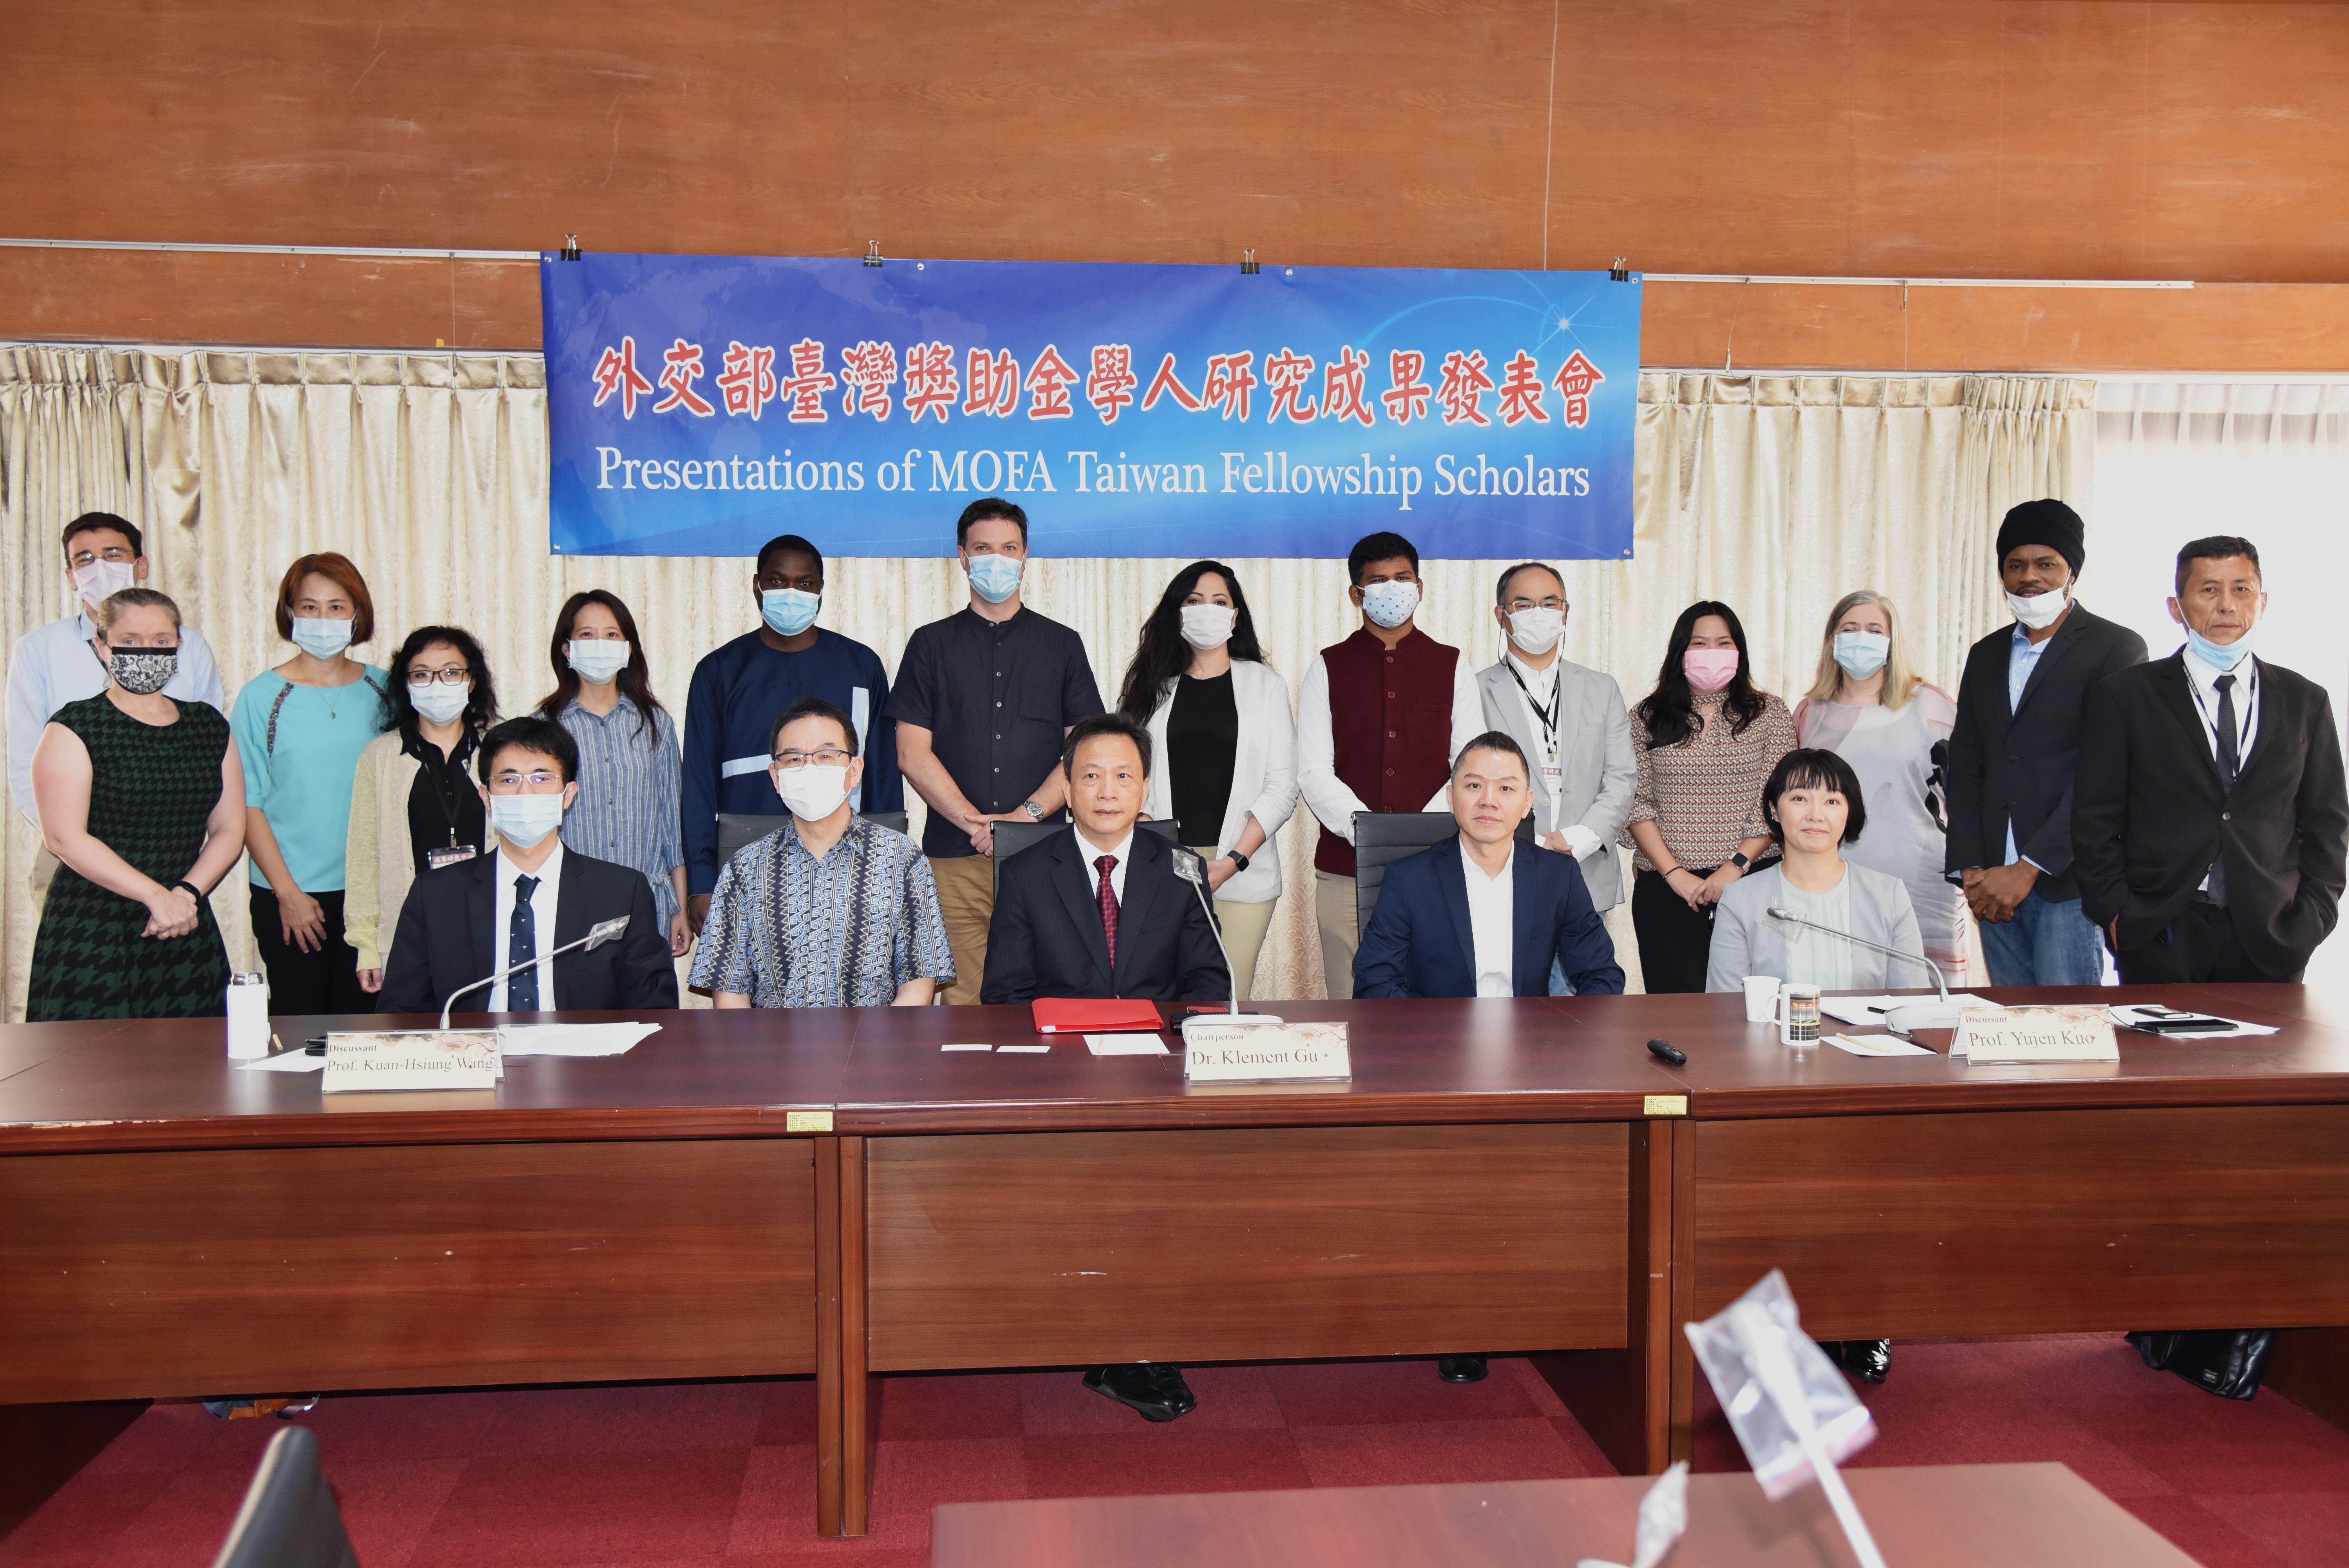 2021 Presentations of MOFA Taiwan Fellowship Scholars: Stability and Prosperity in the Indo-Pacific Region – Taiwan's Possible Role